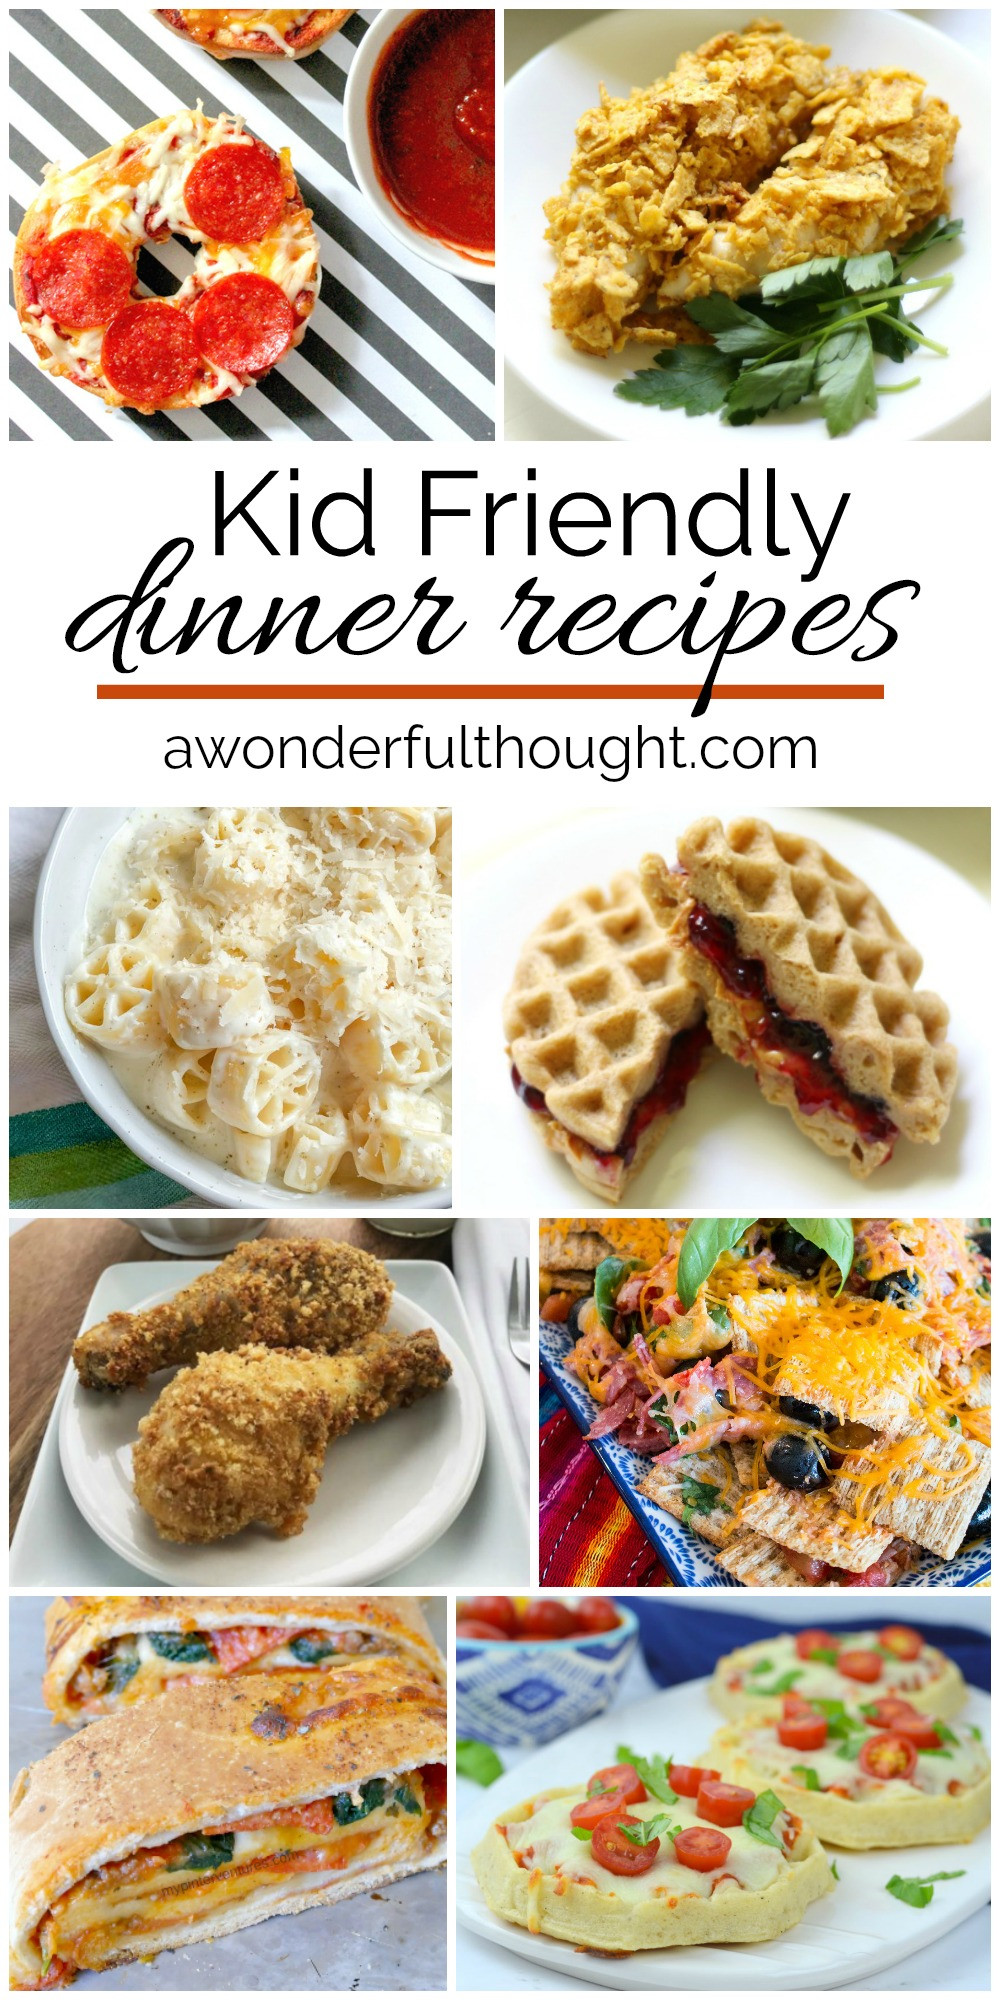 Kid Friendly Dinner Recipes
 Kid Friendly Dinner Recipes A Wonderful Thought